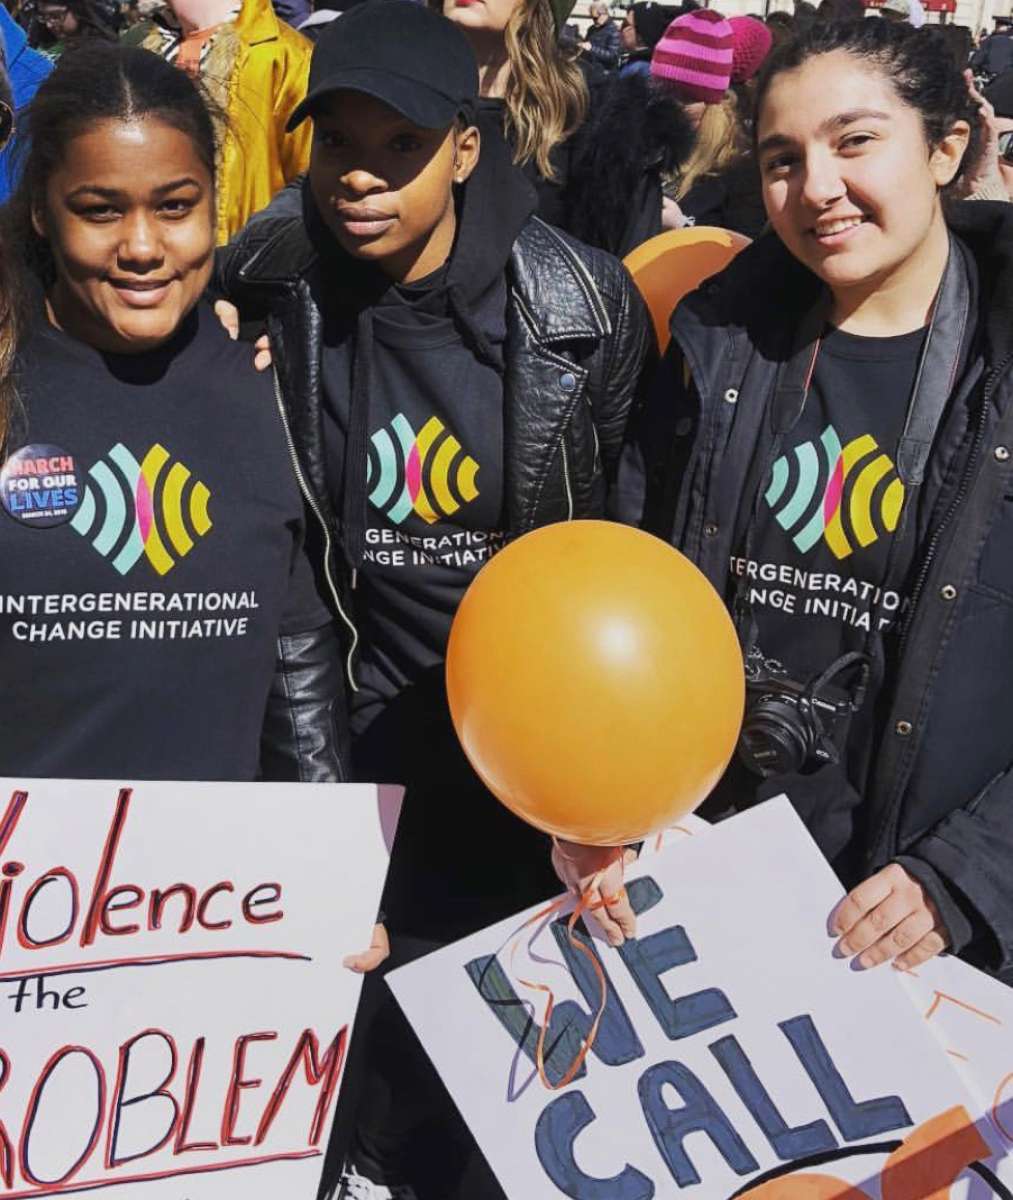 PHOTO: CUNY student Elisabeth Bernard, center, with some youth volunteers at an Intergenerational Change Initiative event.